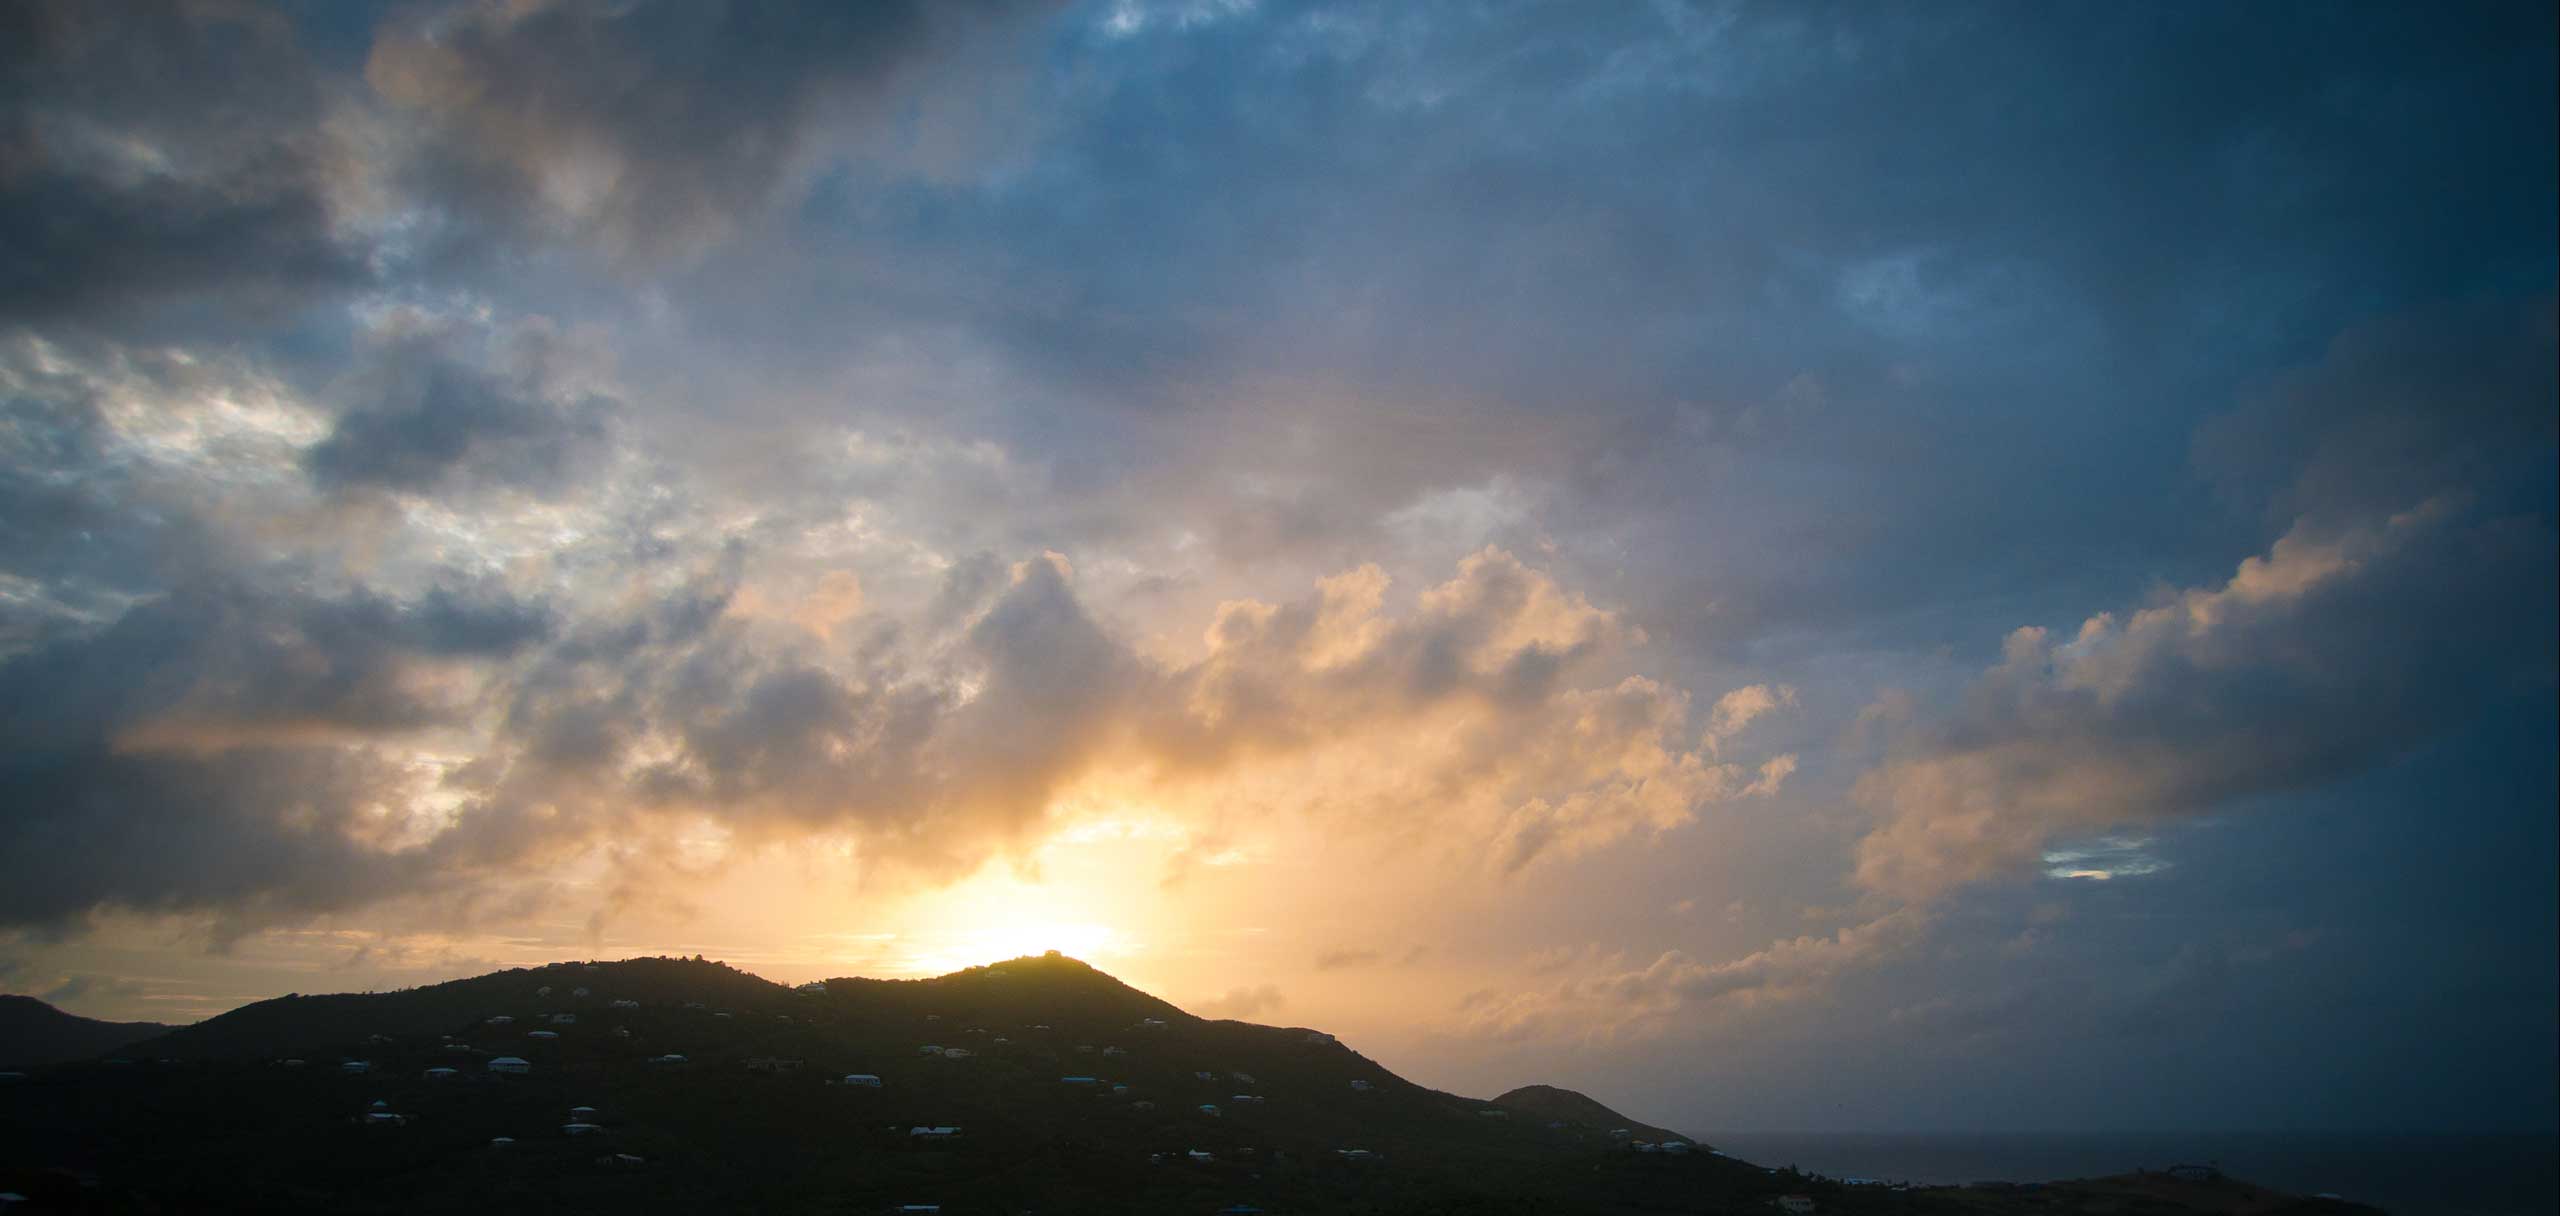 Sunrise over St. Croix after the Storm by Patrick Bennett